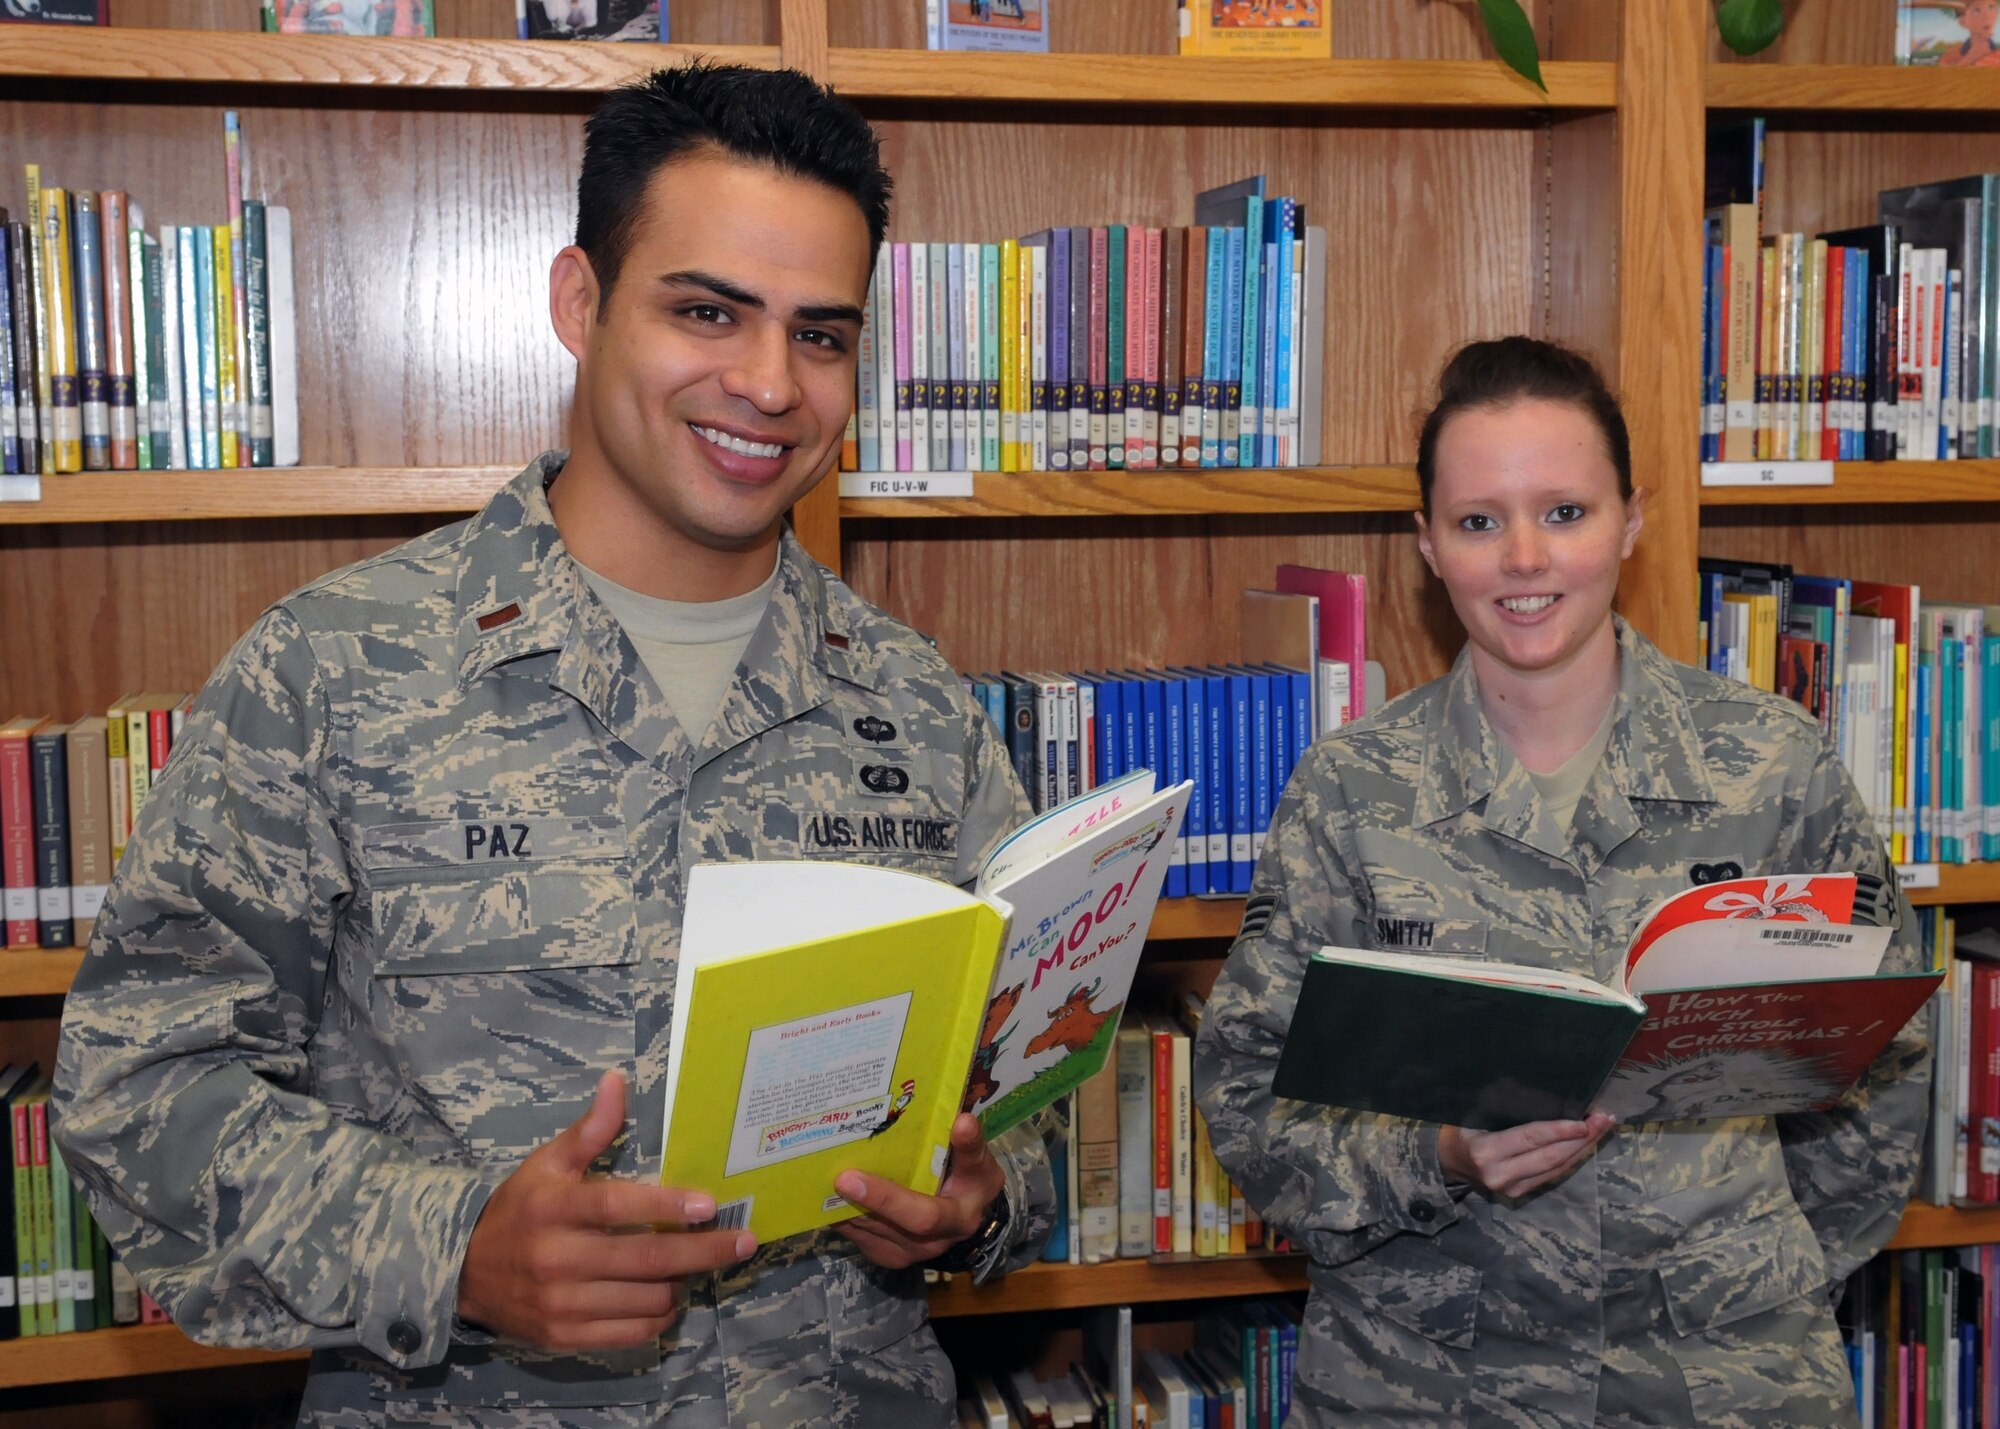 Lt. Rick Paz and Senior Airman Elissa Smith select a book to read to students during the Read Across America event at Eshelman Avenue Elementary School, March 2.  (Photo by Jim Gordon)